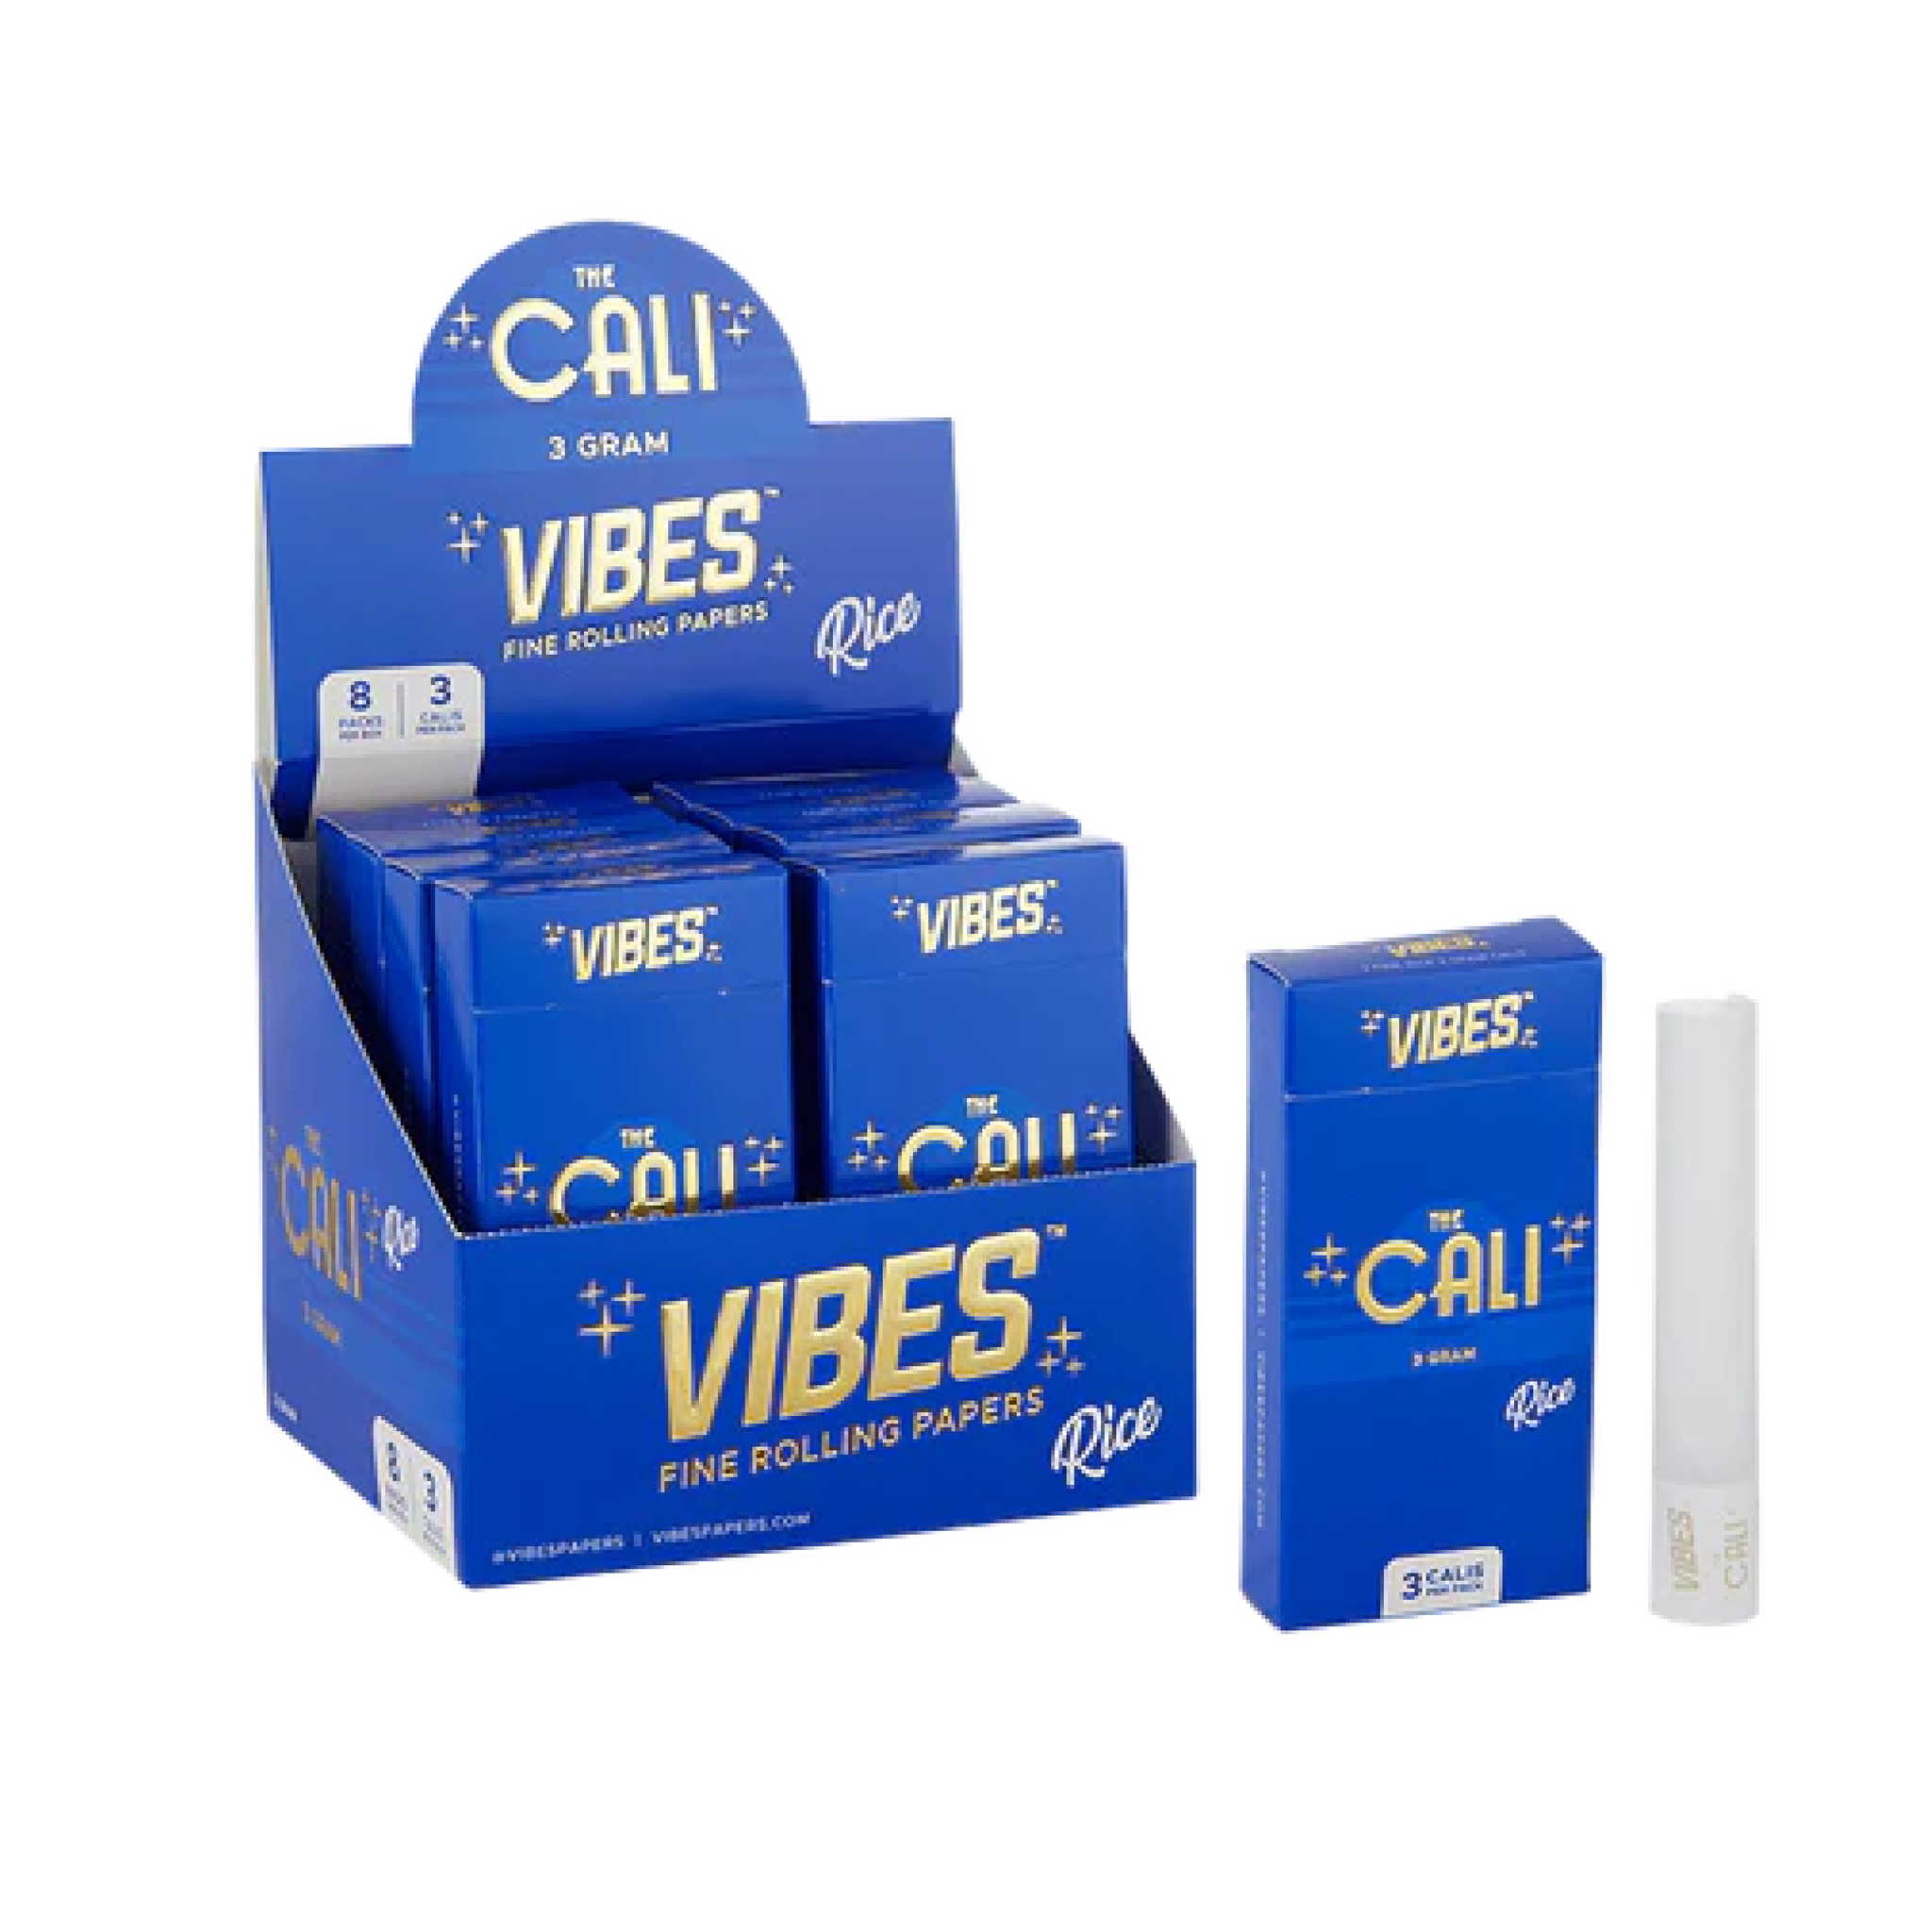 Vibes Rice "The Cali" Cones